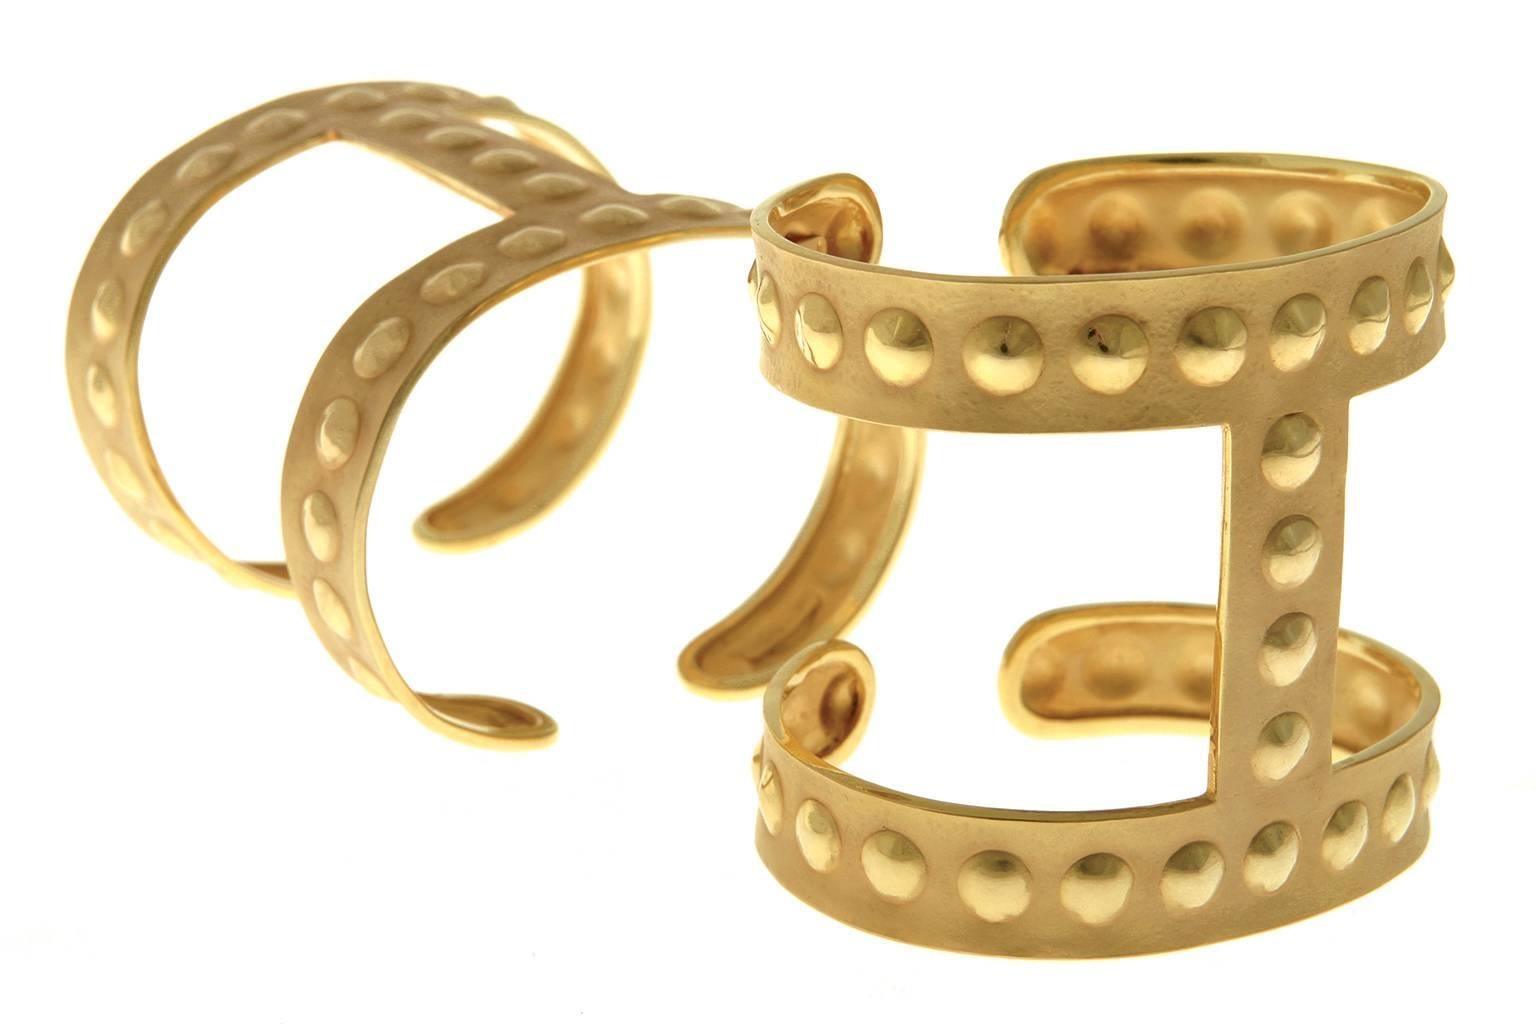 Metal: 18K Yellow Gold
Wrist Size: 6.5”
Cuff Length: approximately 2”
Please allow for slight variations in measurements as pieces are handmade.
 
GLADIATOR COLLECTION © 2002
Youmna’s Gladiator Bubble Cuff in her distinctive matte 18K yellow gold